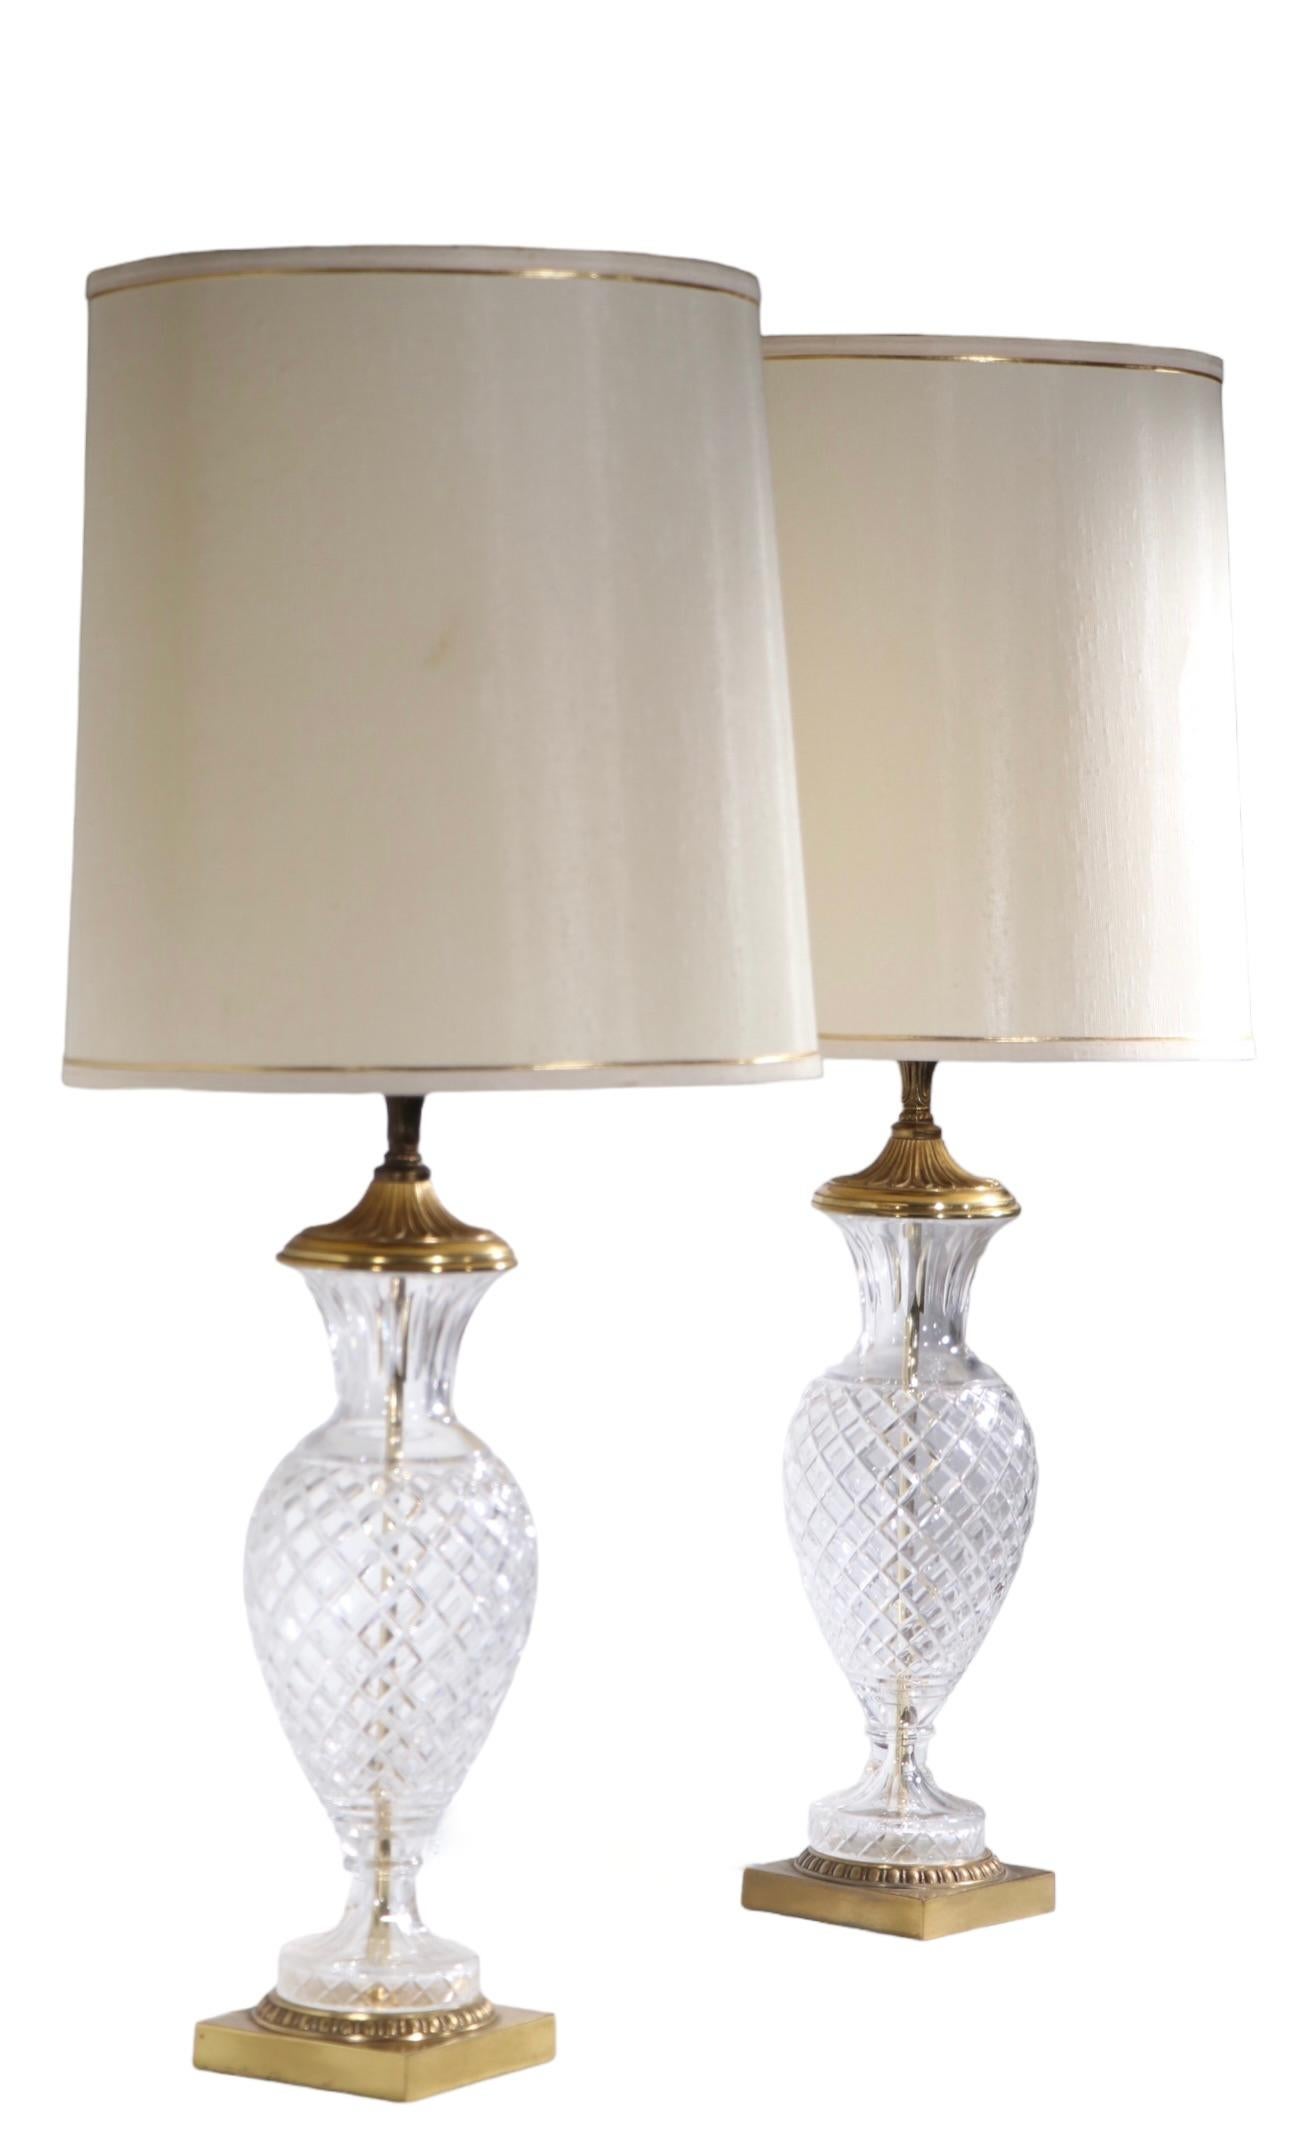 Pair of   Formal Classical Revival Style Glass and Brass  Lamps c 1940/1960's For Sale 11